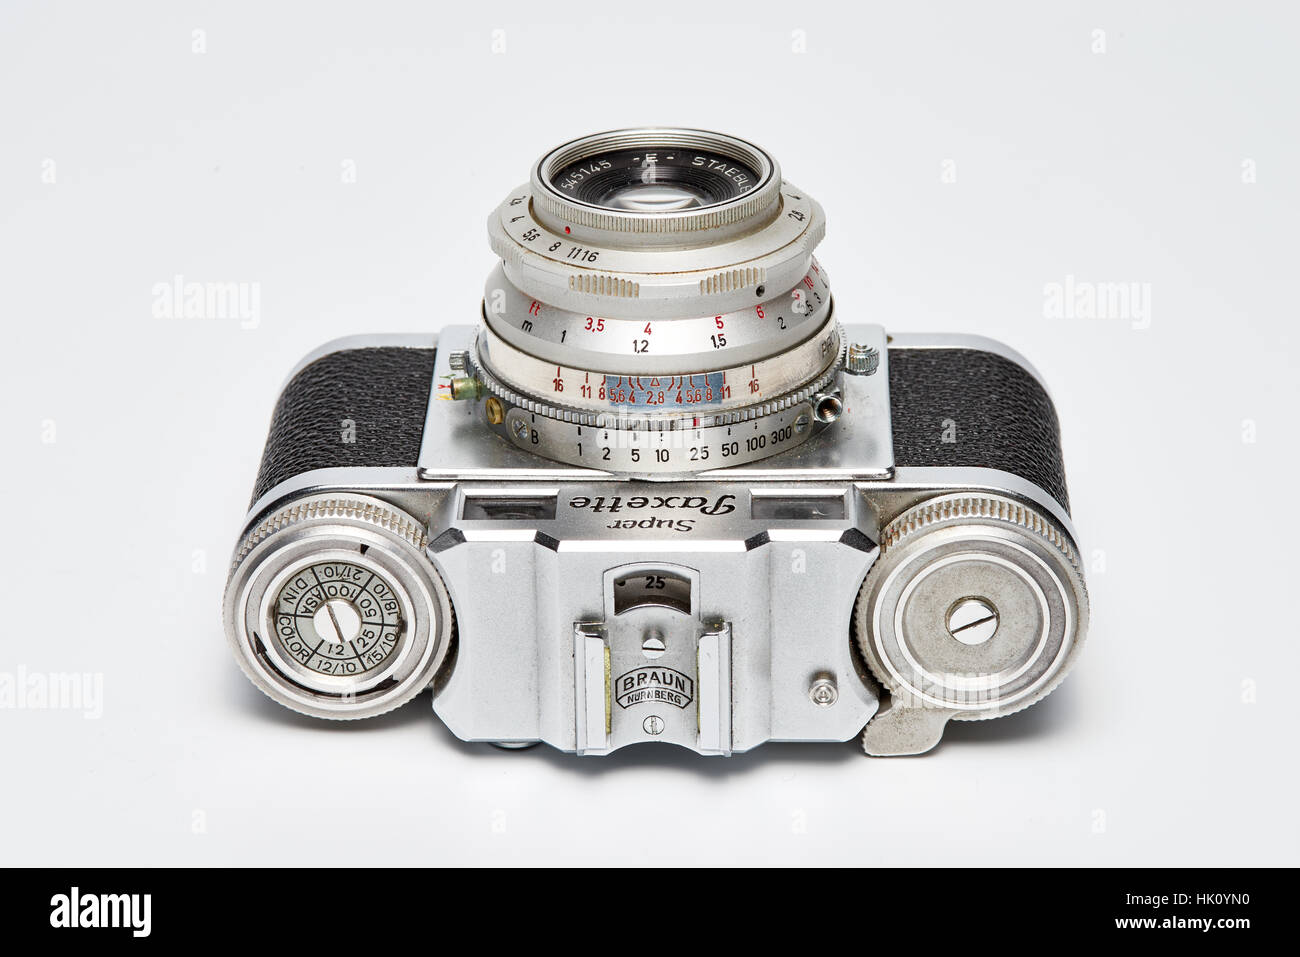 Braun Super Paxette I is a series of 35mm film rangefinder cameras made by Braun and introduced in 1953. Stock Photo